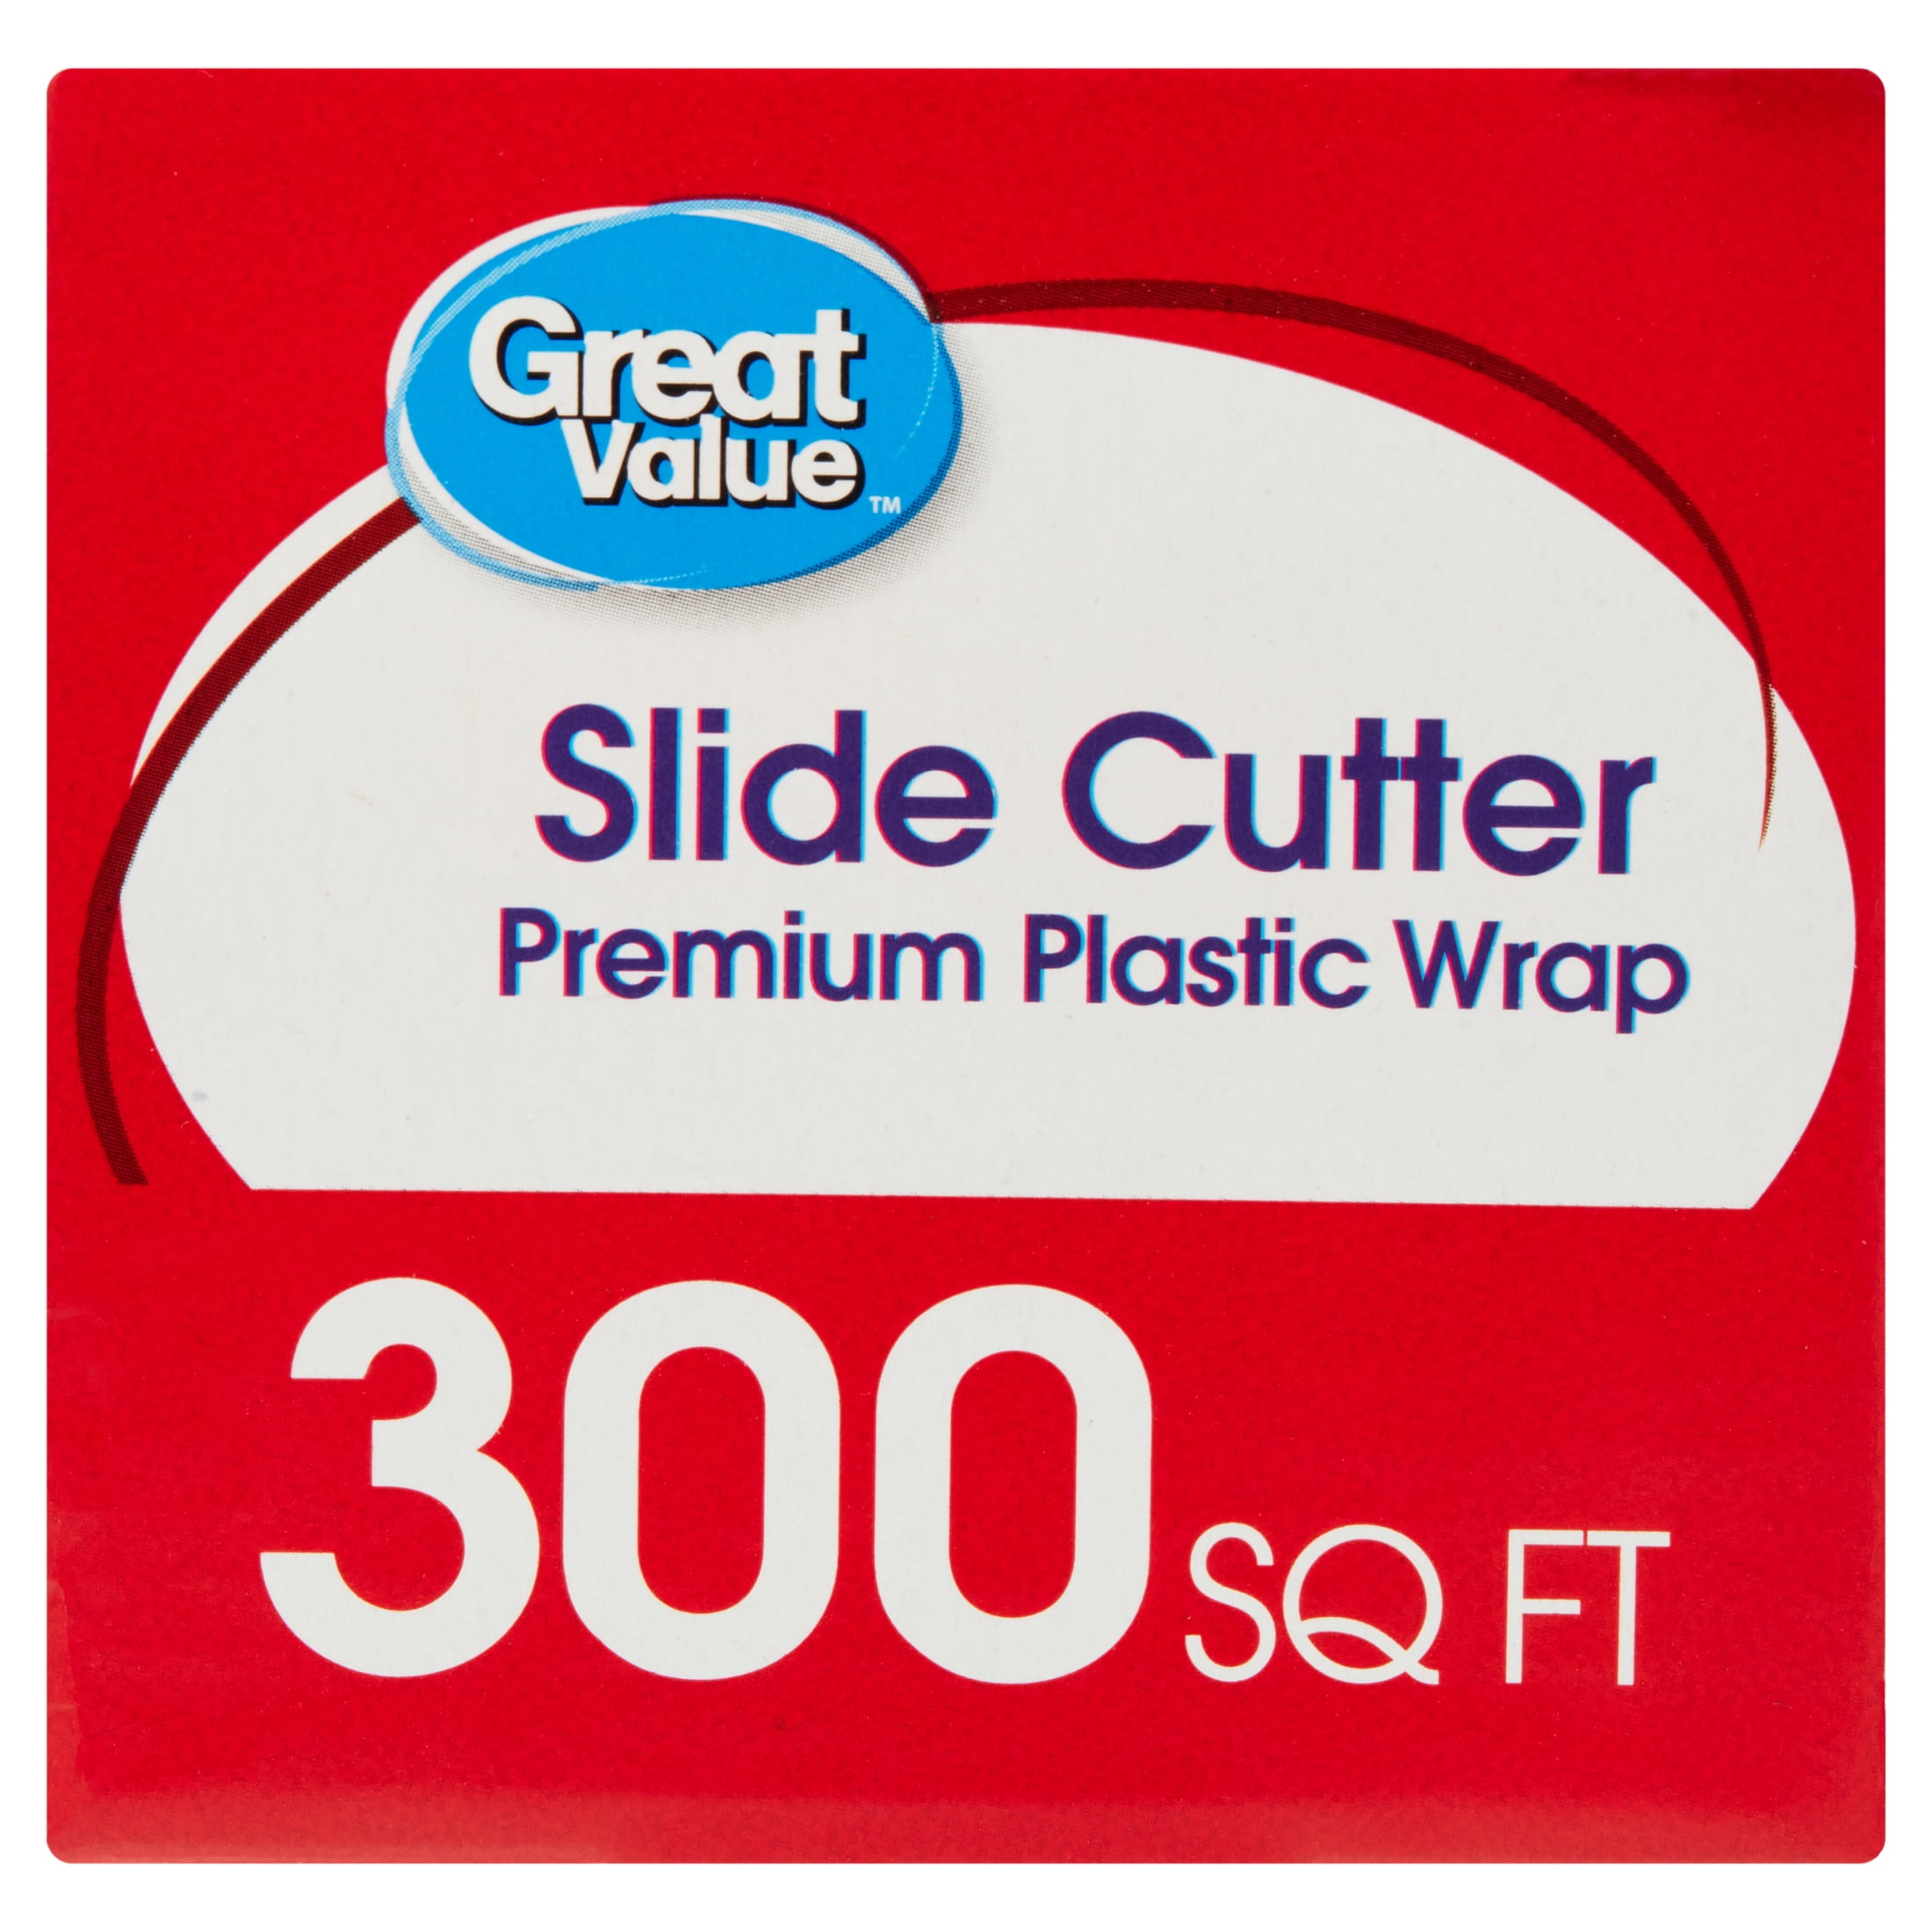 Simply Done Plastic Wrap, Professional Strength, Slide Cutter